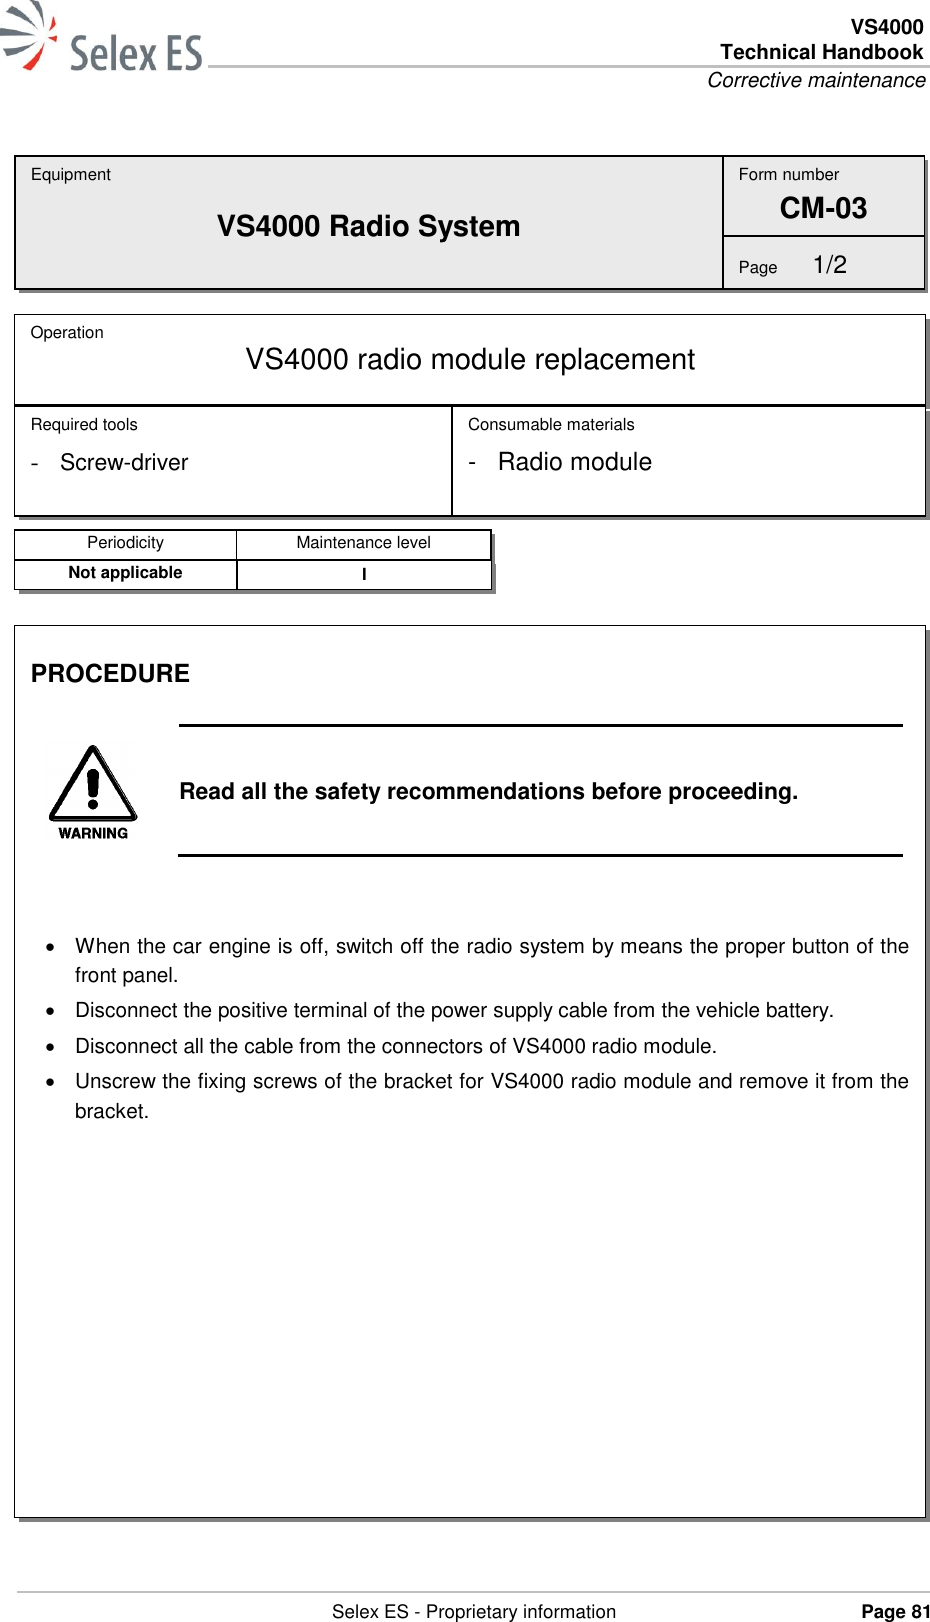  VS4000 Technical Handbook Corrective maintenance   Selex ES - Proprietary information Page 81    Equipment VS4000 Radio System Operation  VS4000 radio module replacement Required tools - Screw-driver Consumable materials -  Radio module Form number CM-03 Page  1/2 Periodicity Maintenance level Not applicable I PROCEDURE   Read all the safety recommendations before proceeding.     When the car engine is off, switch off the radio system by means the proper button of the front panel.   Disconnect the positive terminal of the power supply cable from the vehicle battery.   Disconnect all the cable from the connectors of VS4000 radio module.   Unscrew the fixing screws of the bracket for VS4000 radio module and remove it from the bracket.  